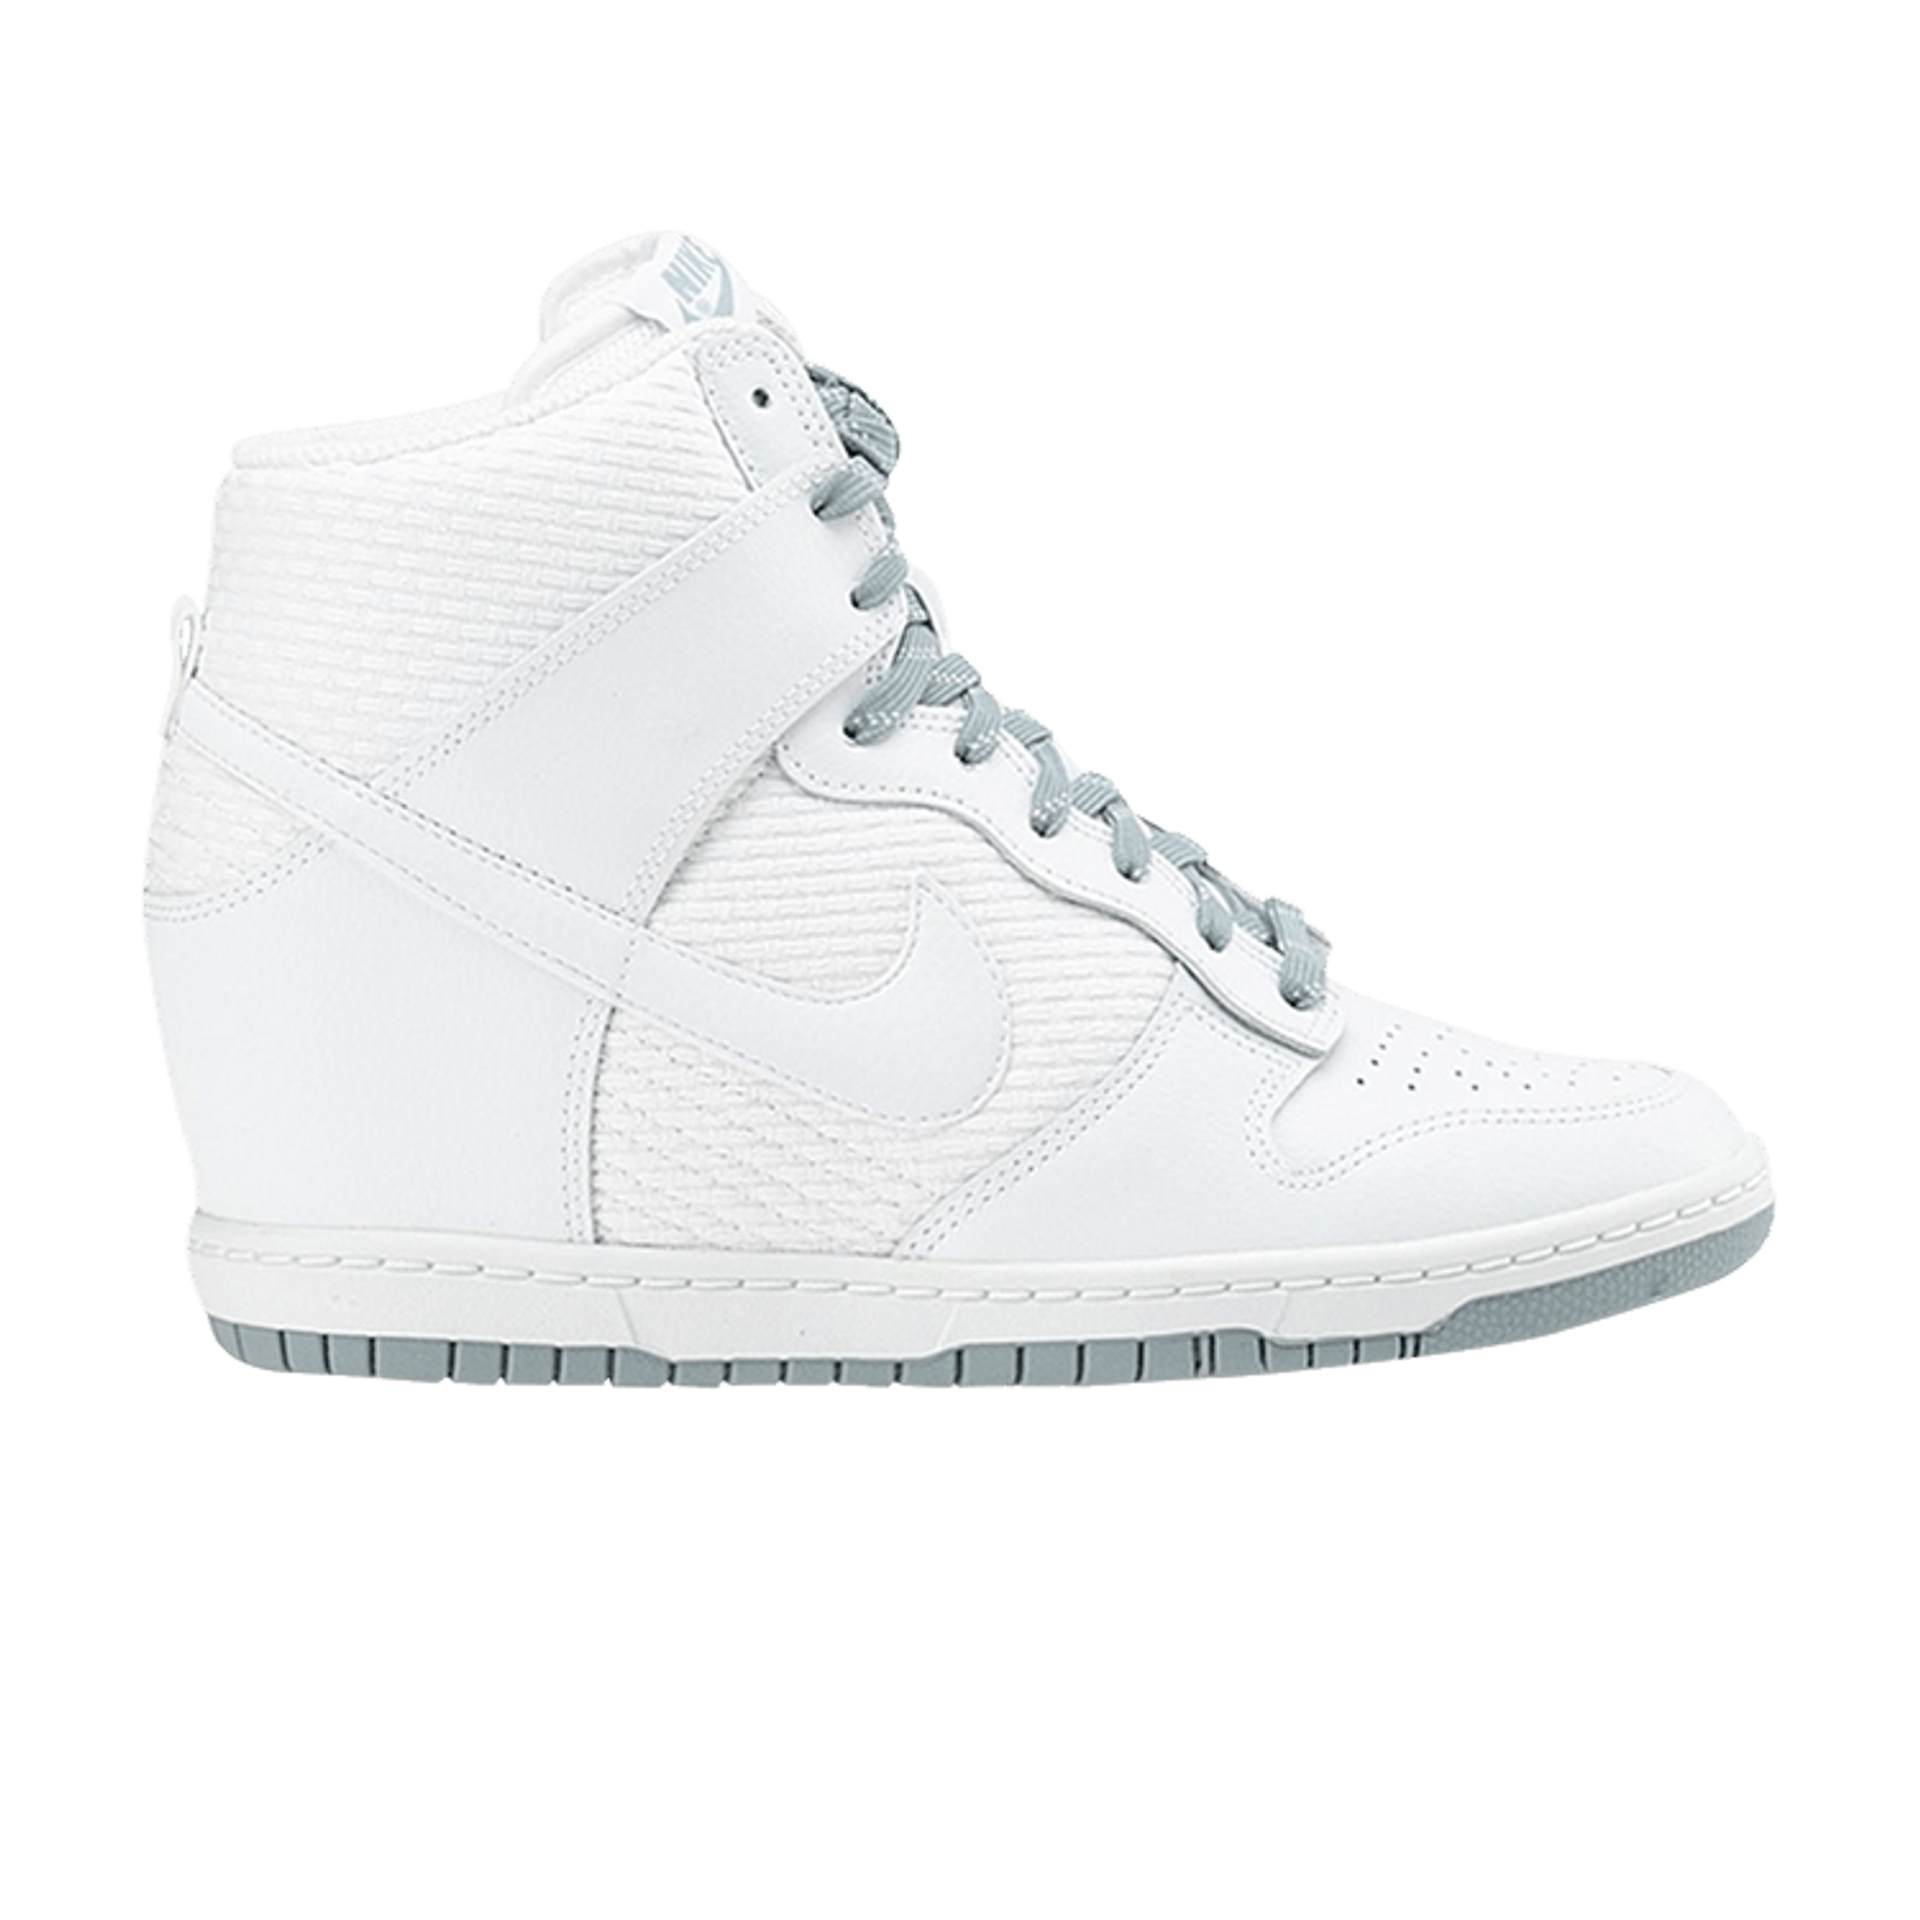 Wmns Dunk Sky High Essential 'White Dove Grey'